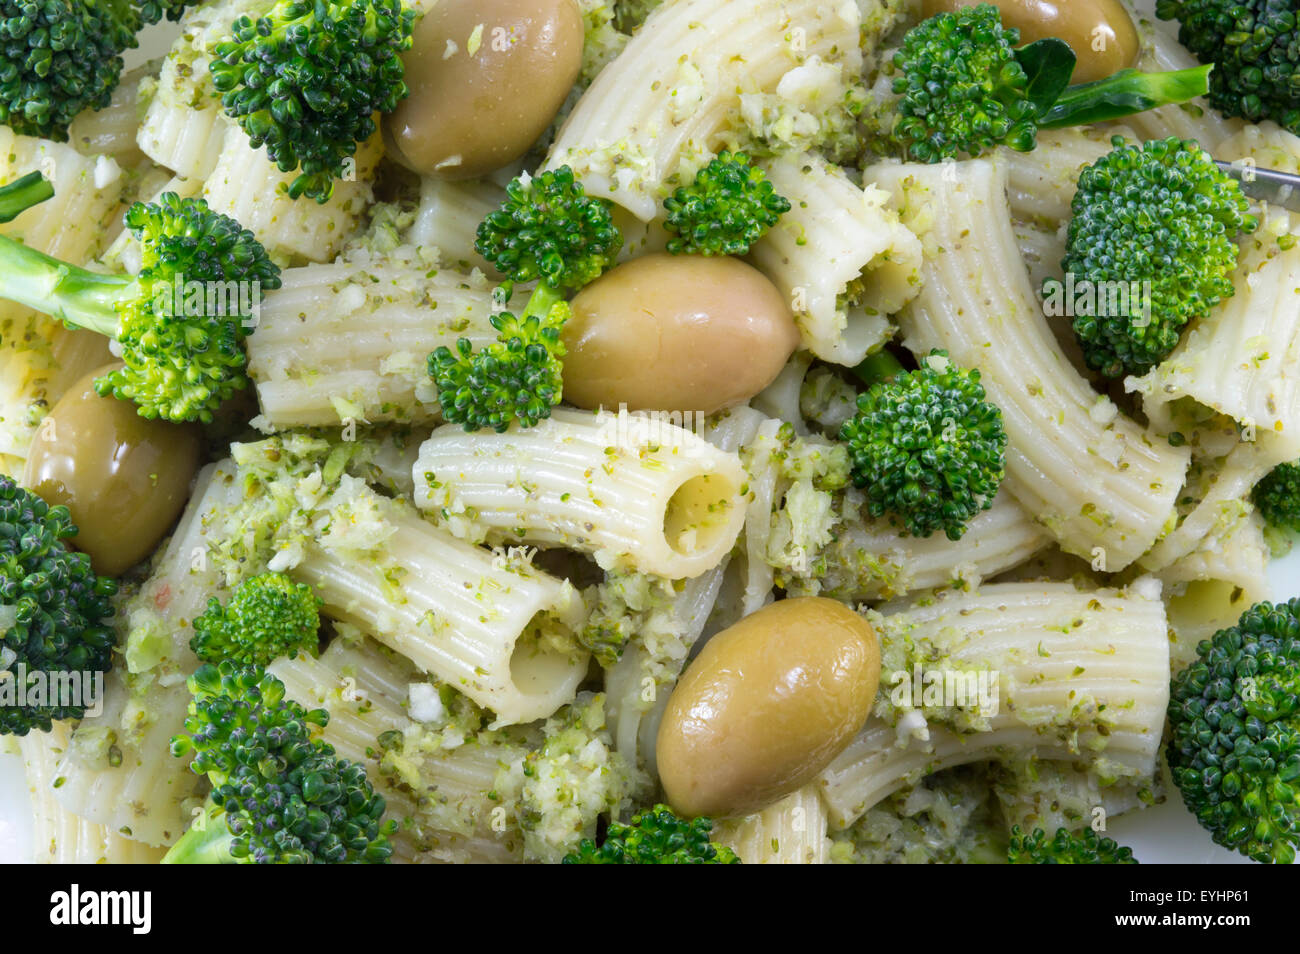 Pasta with broccoli and natural olives close up. Healthy pasta meal Stock Photo